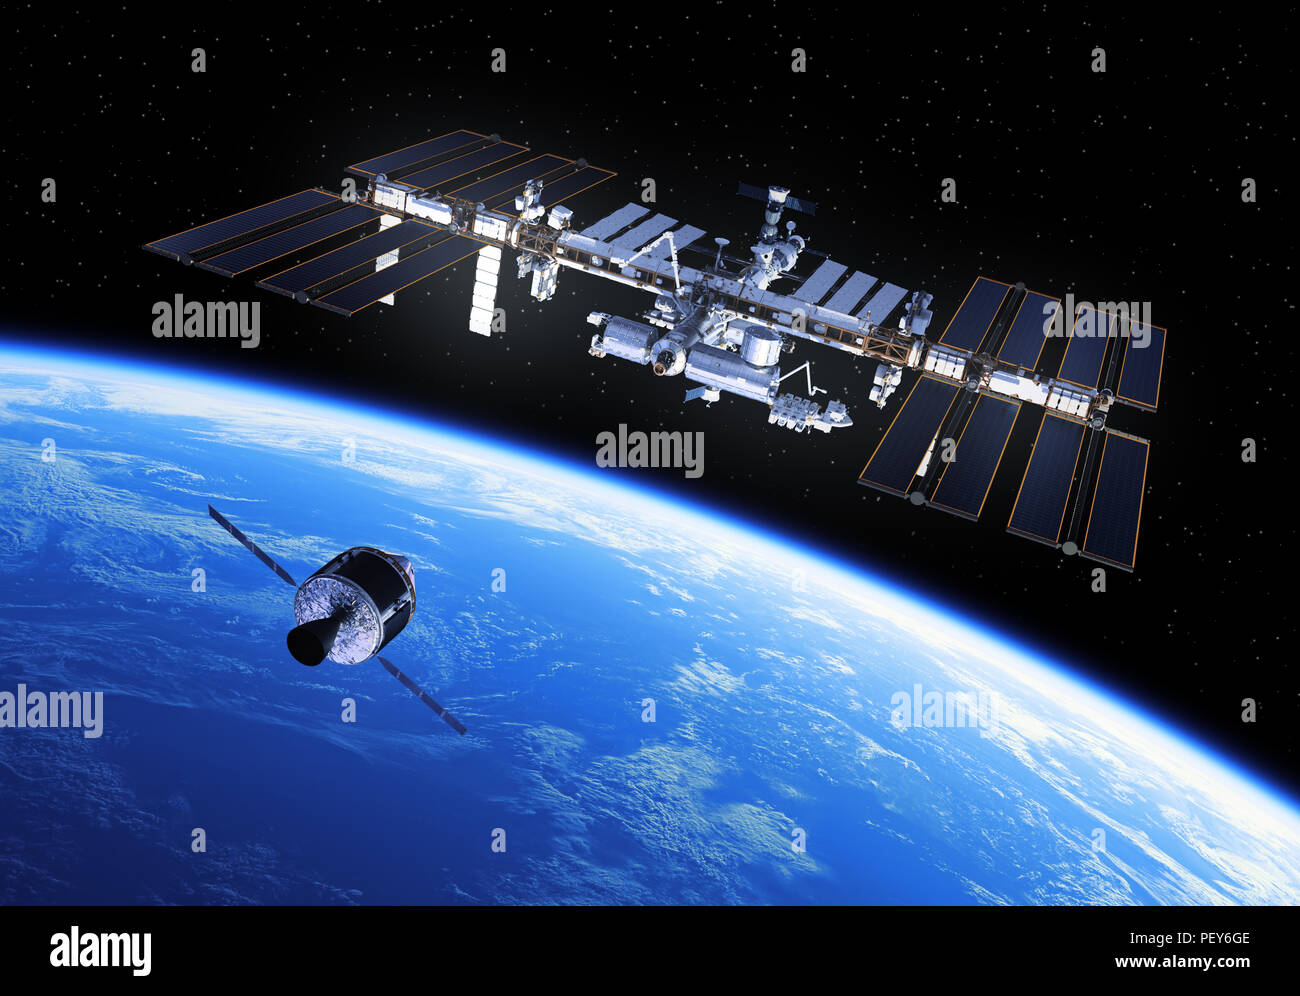 Crew Exploration Vehicle Is Preparing To Dock With International Space Station. 3D Illustration. Stock Photo